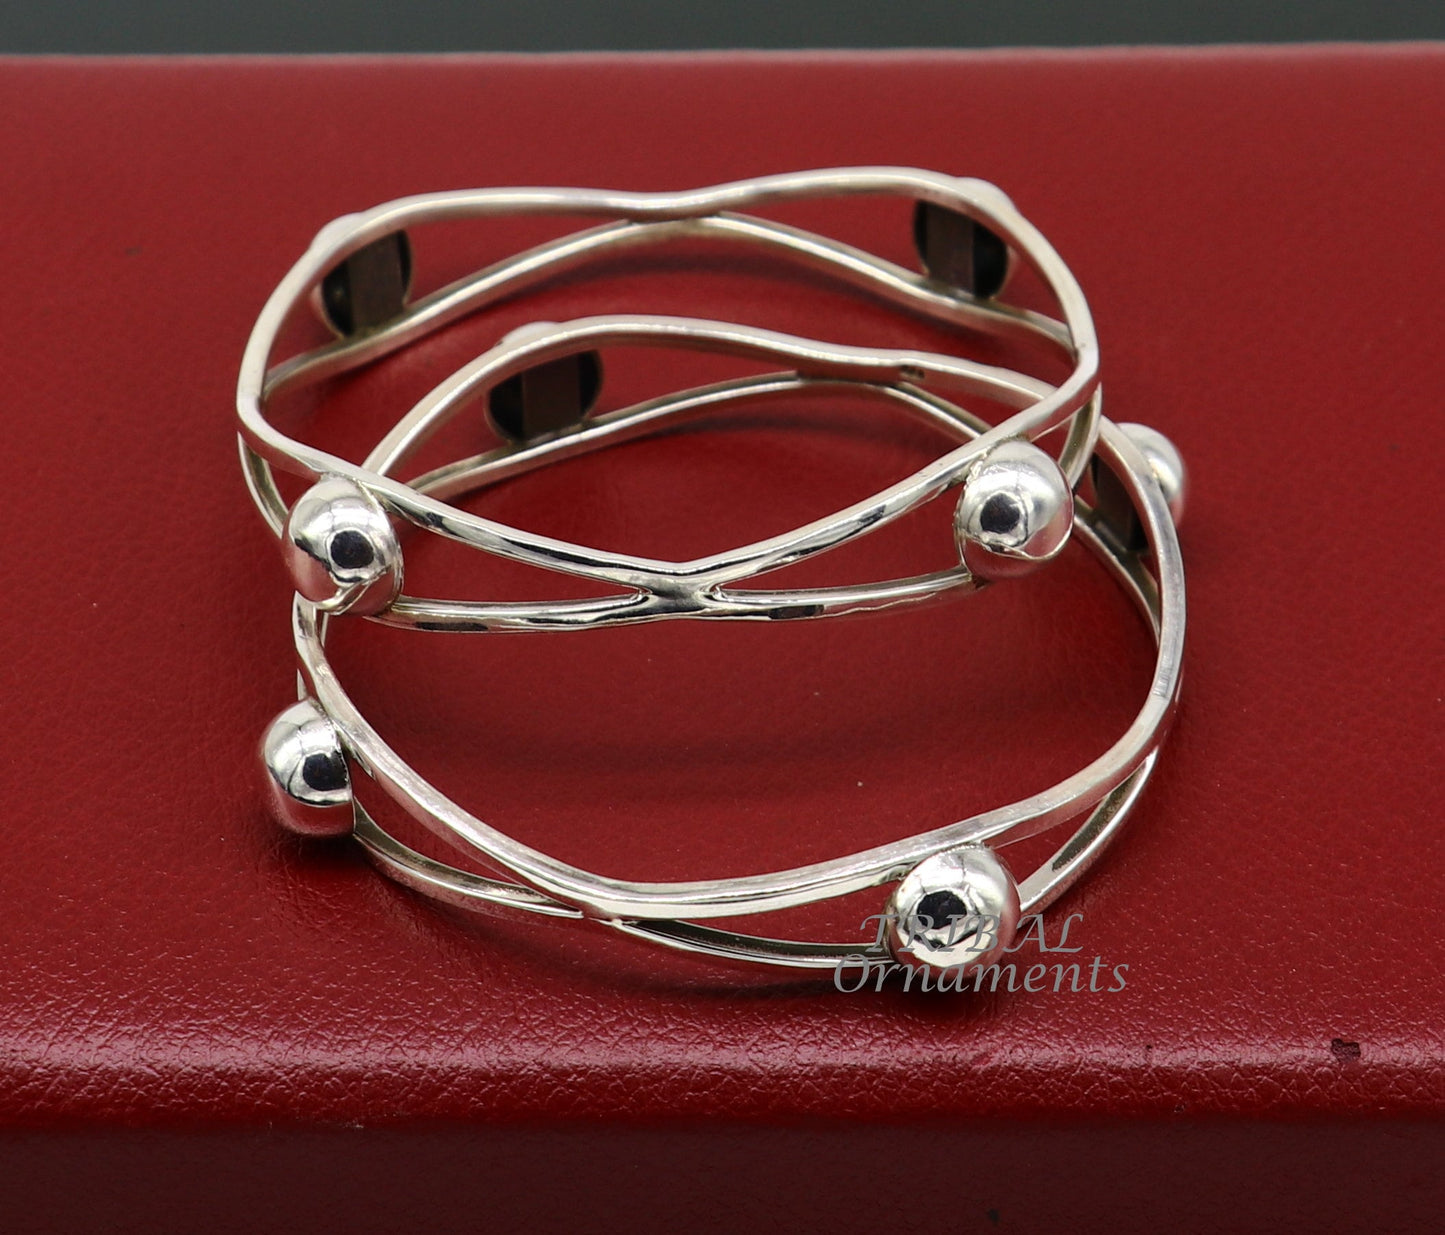 925 sterling silver flower design unique style handmade bangle bracelet, best brides collection wedding jewelry from india nba343 - TRIBAL ORNAMENTS